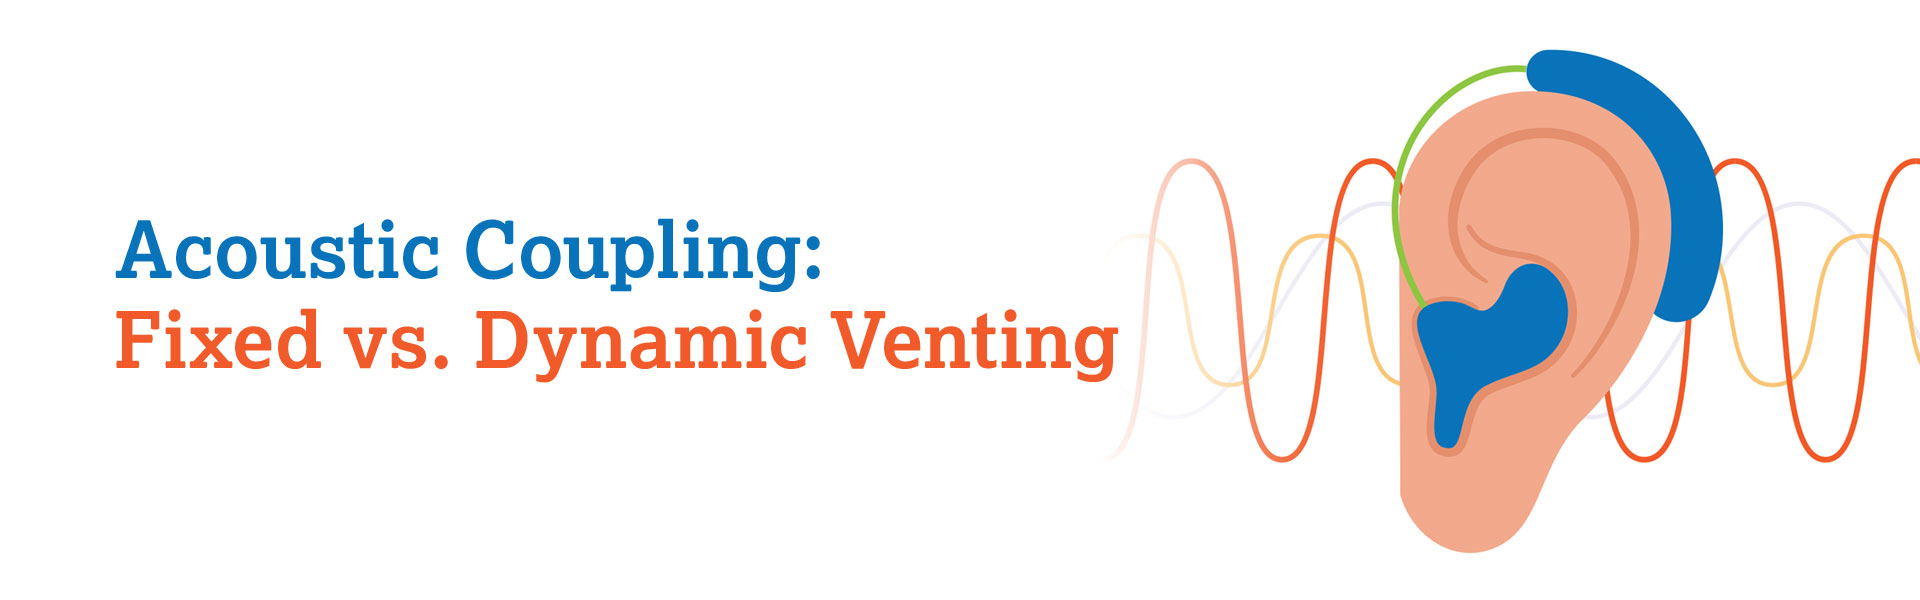 Acoustic Coupling: Fixed vs. Dynamic Venting